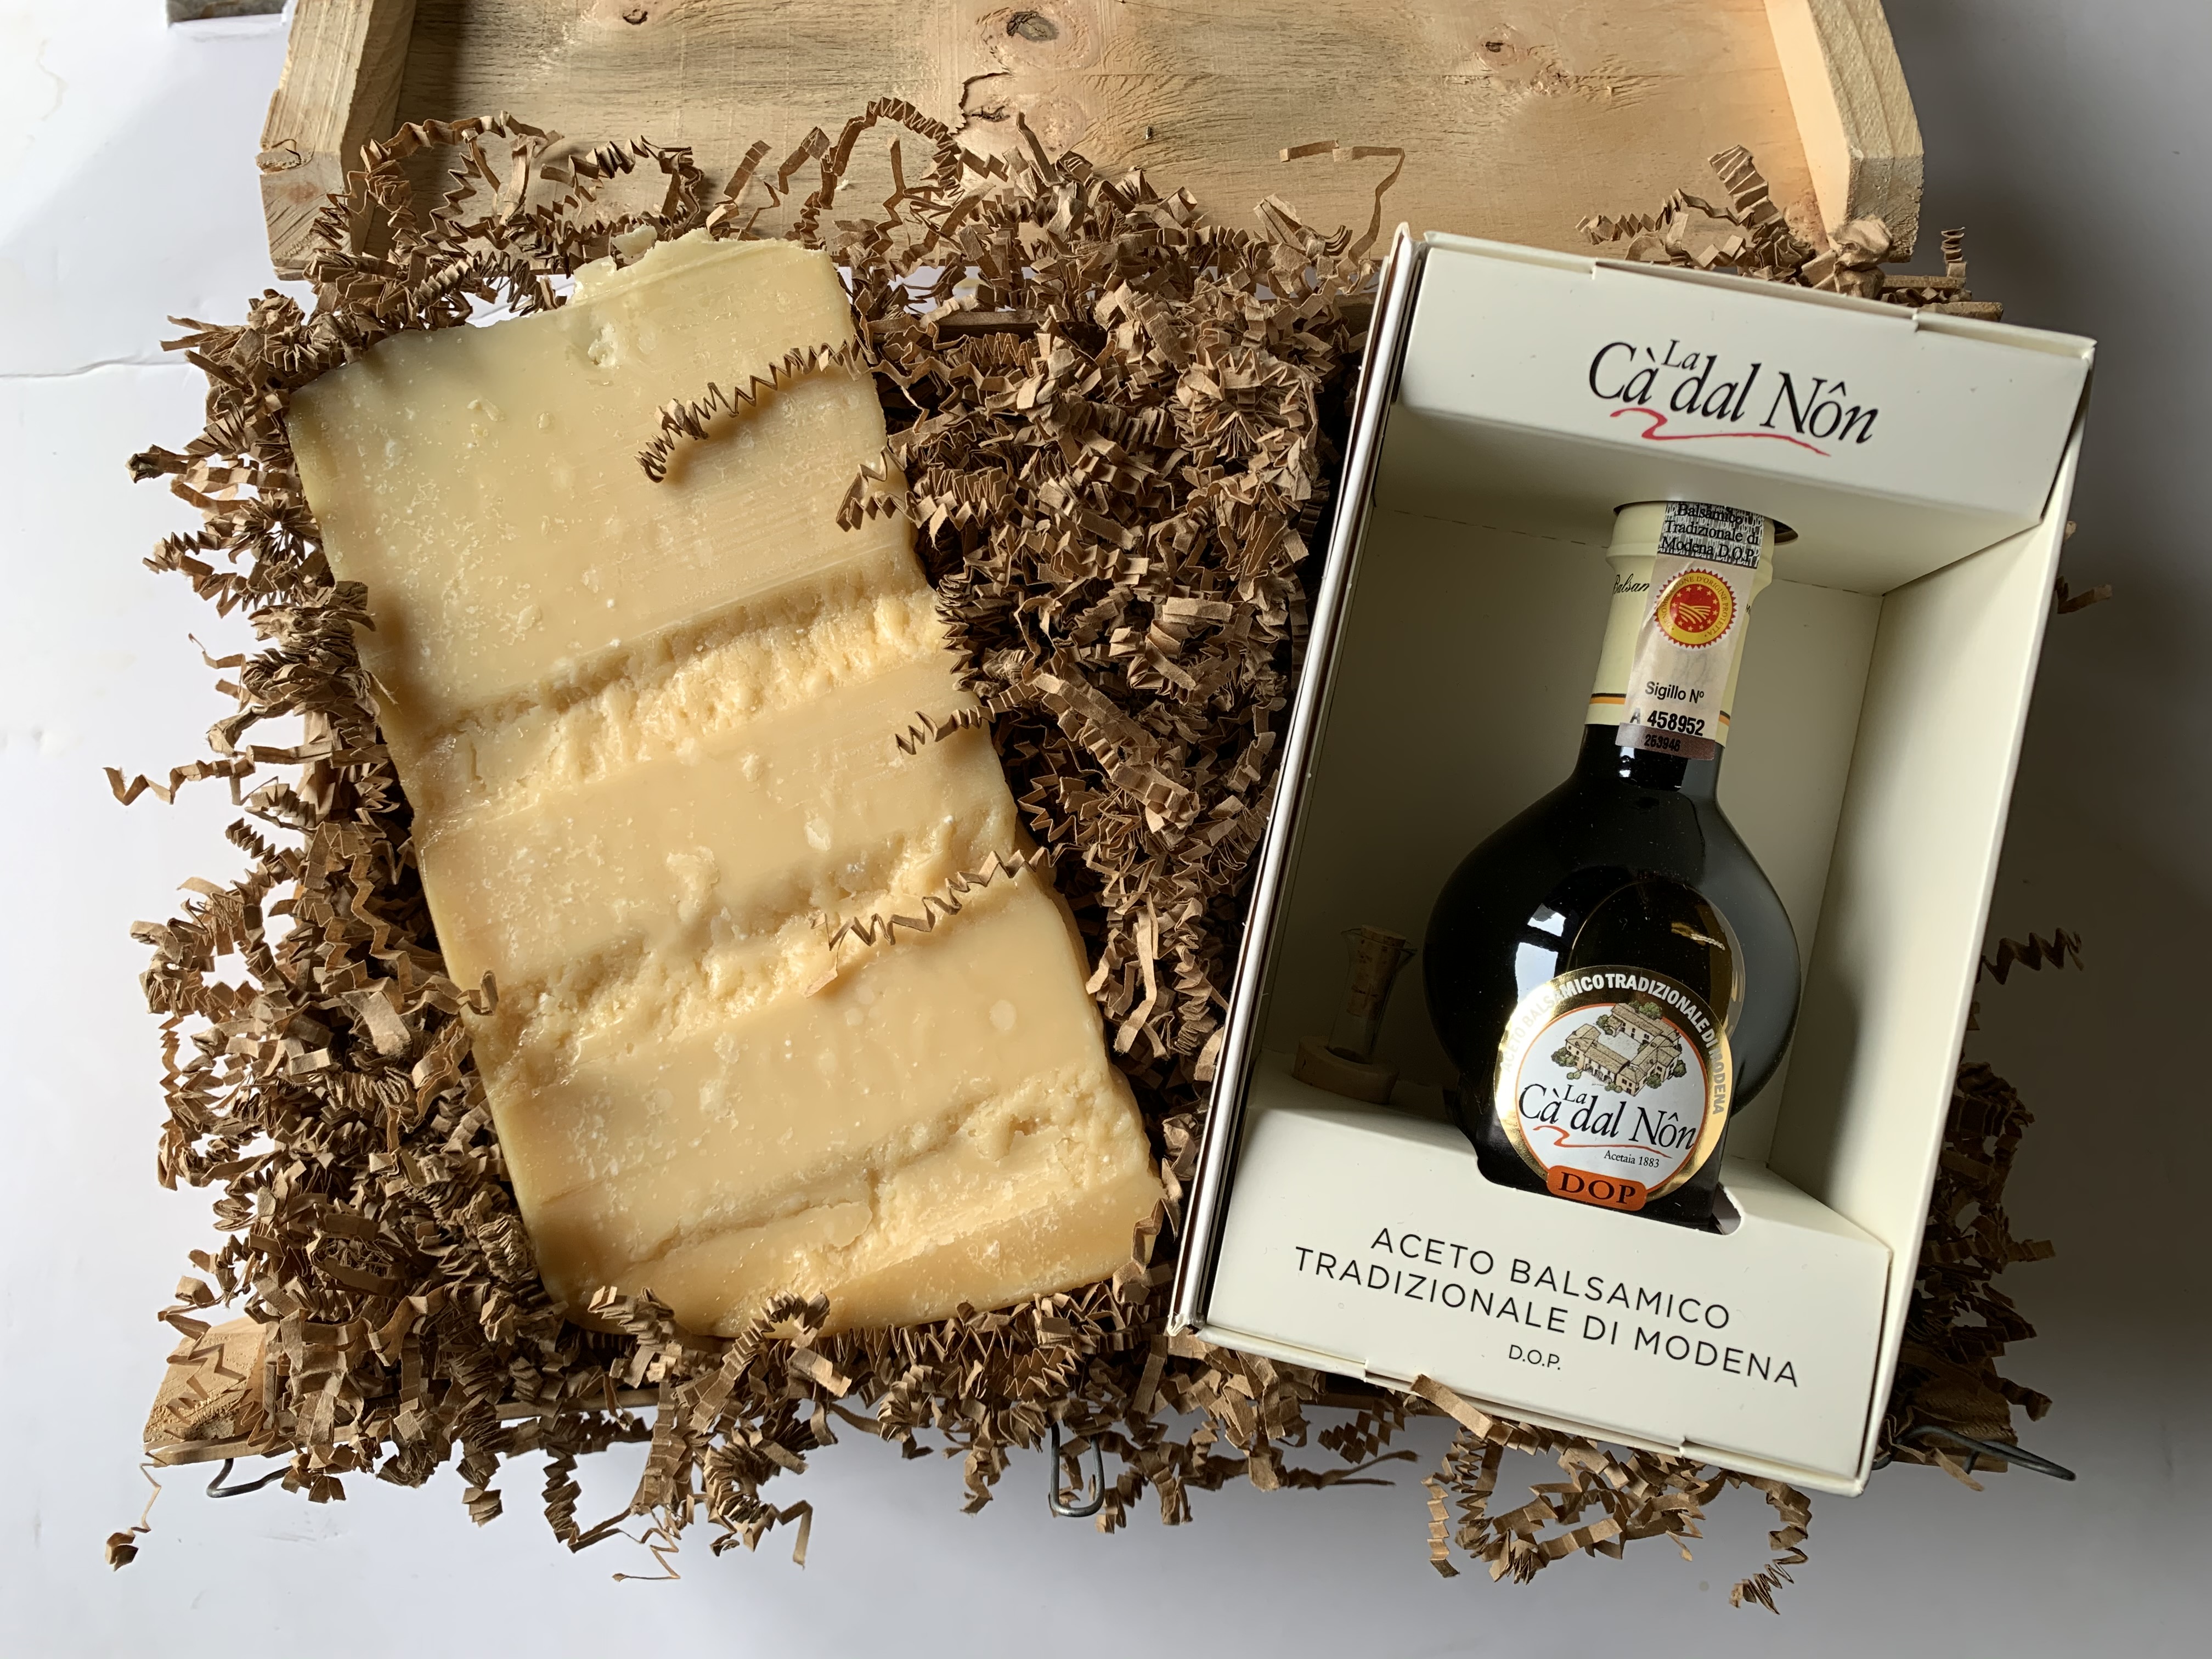 Vacche Rosse Cheese and Traditional Balsamic Vinegar of Modena